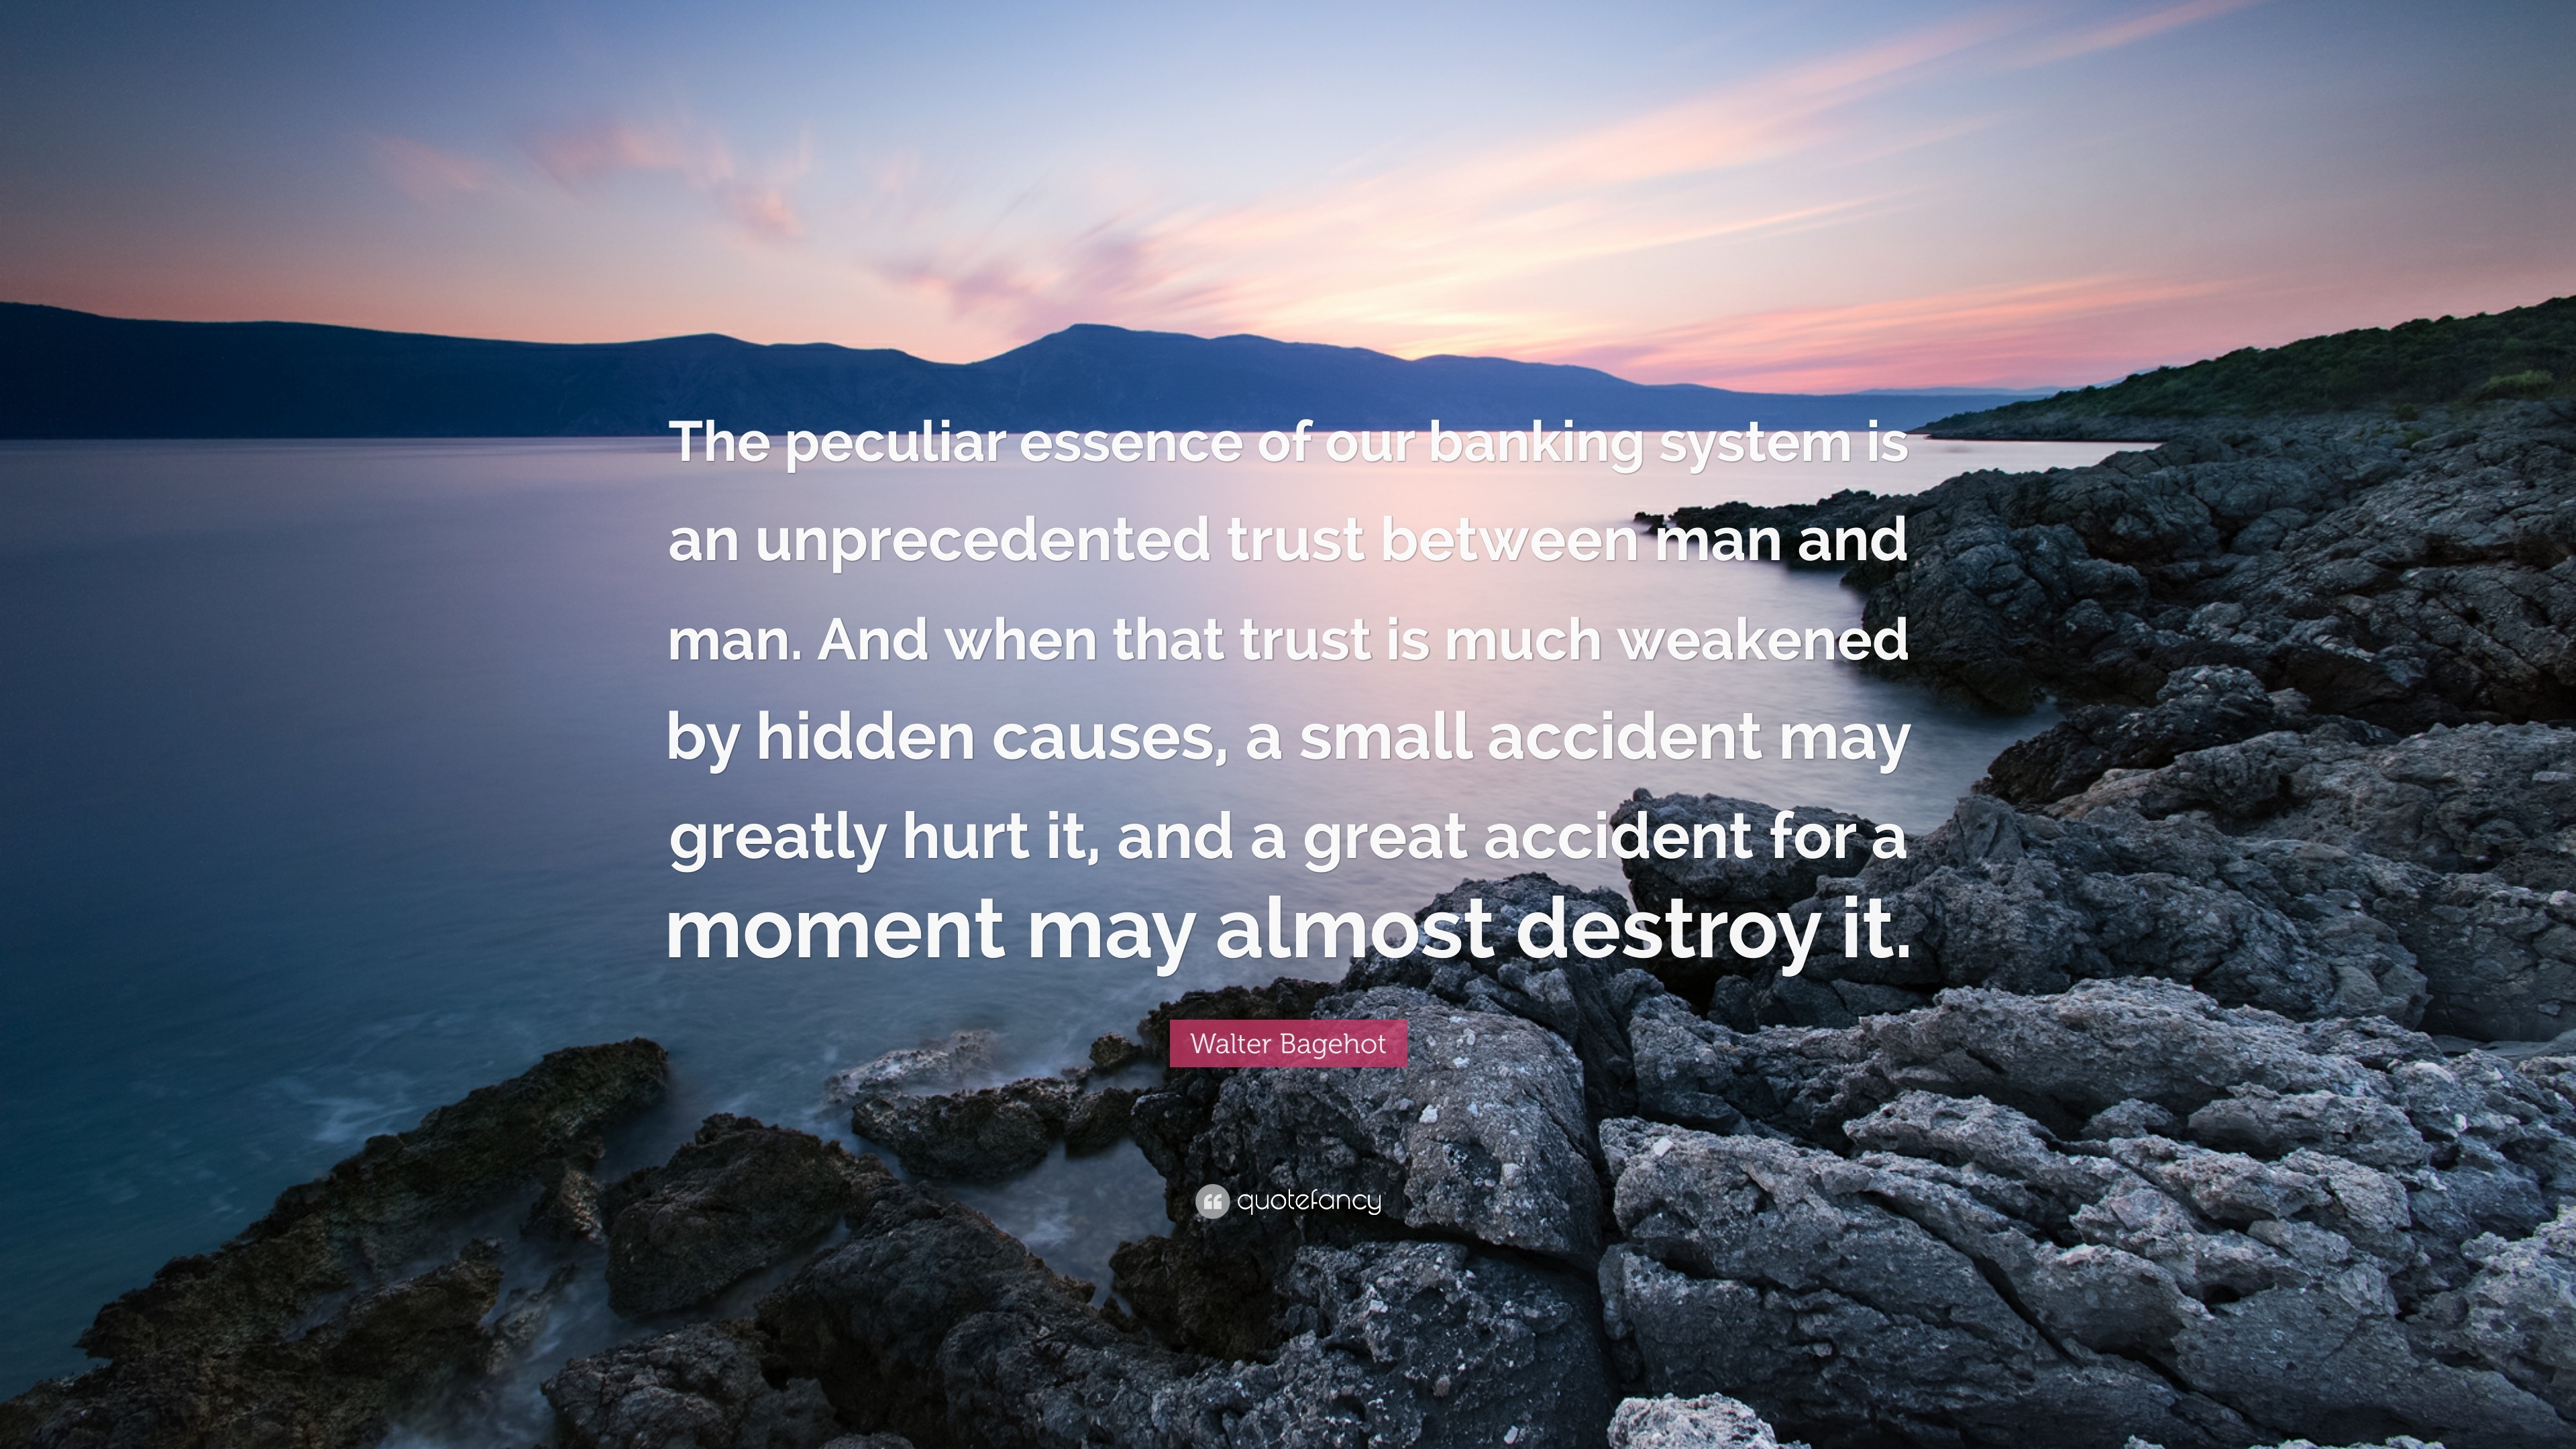 and when that trust is much weakened by hidden causes, a small